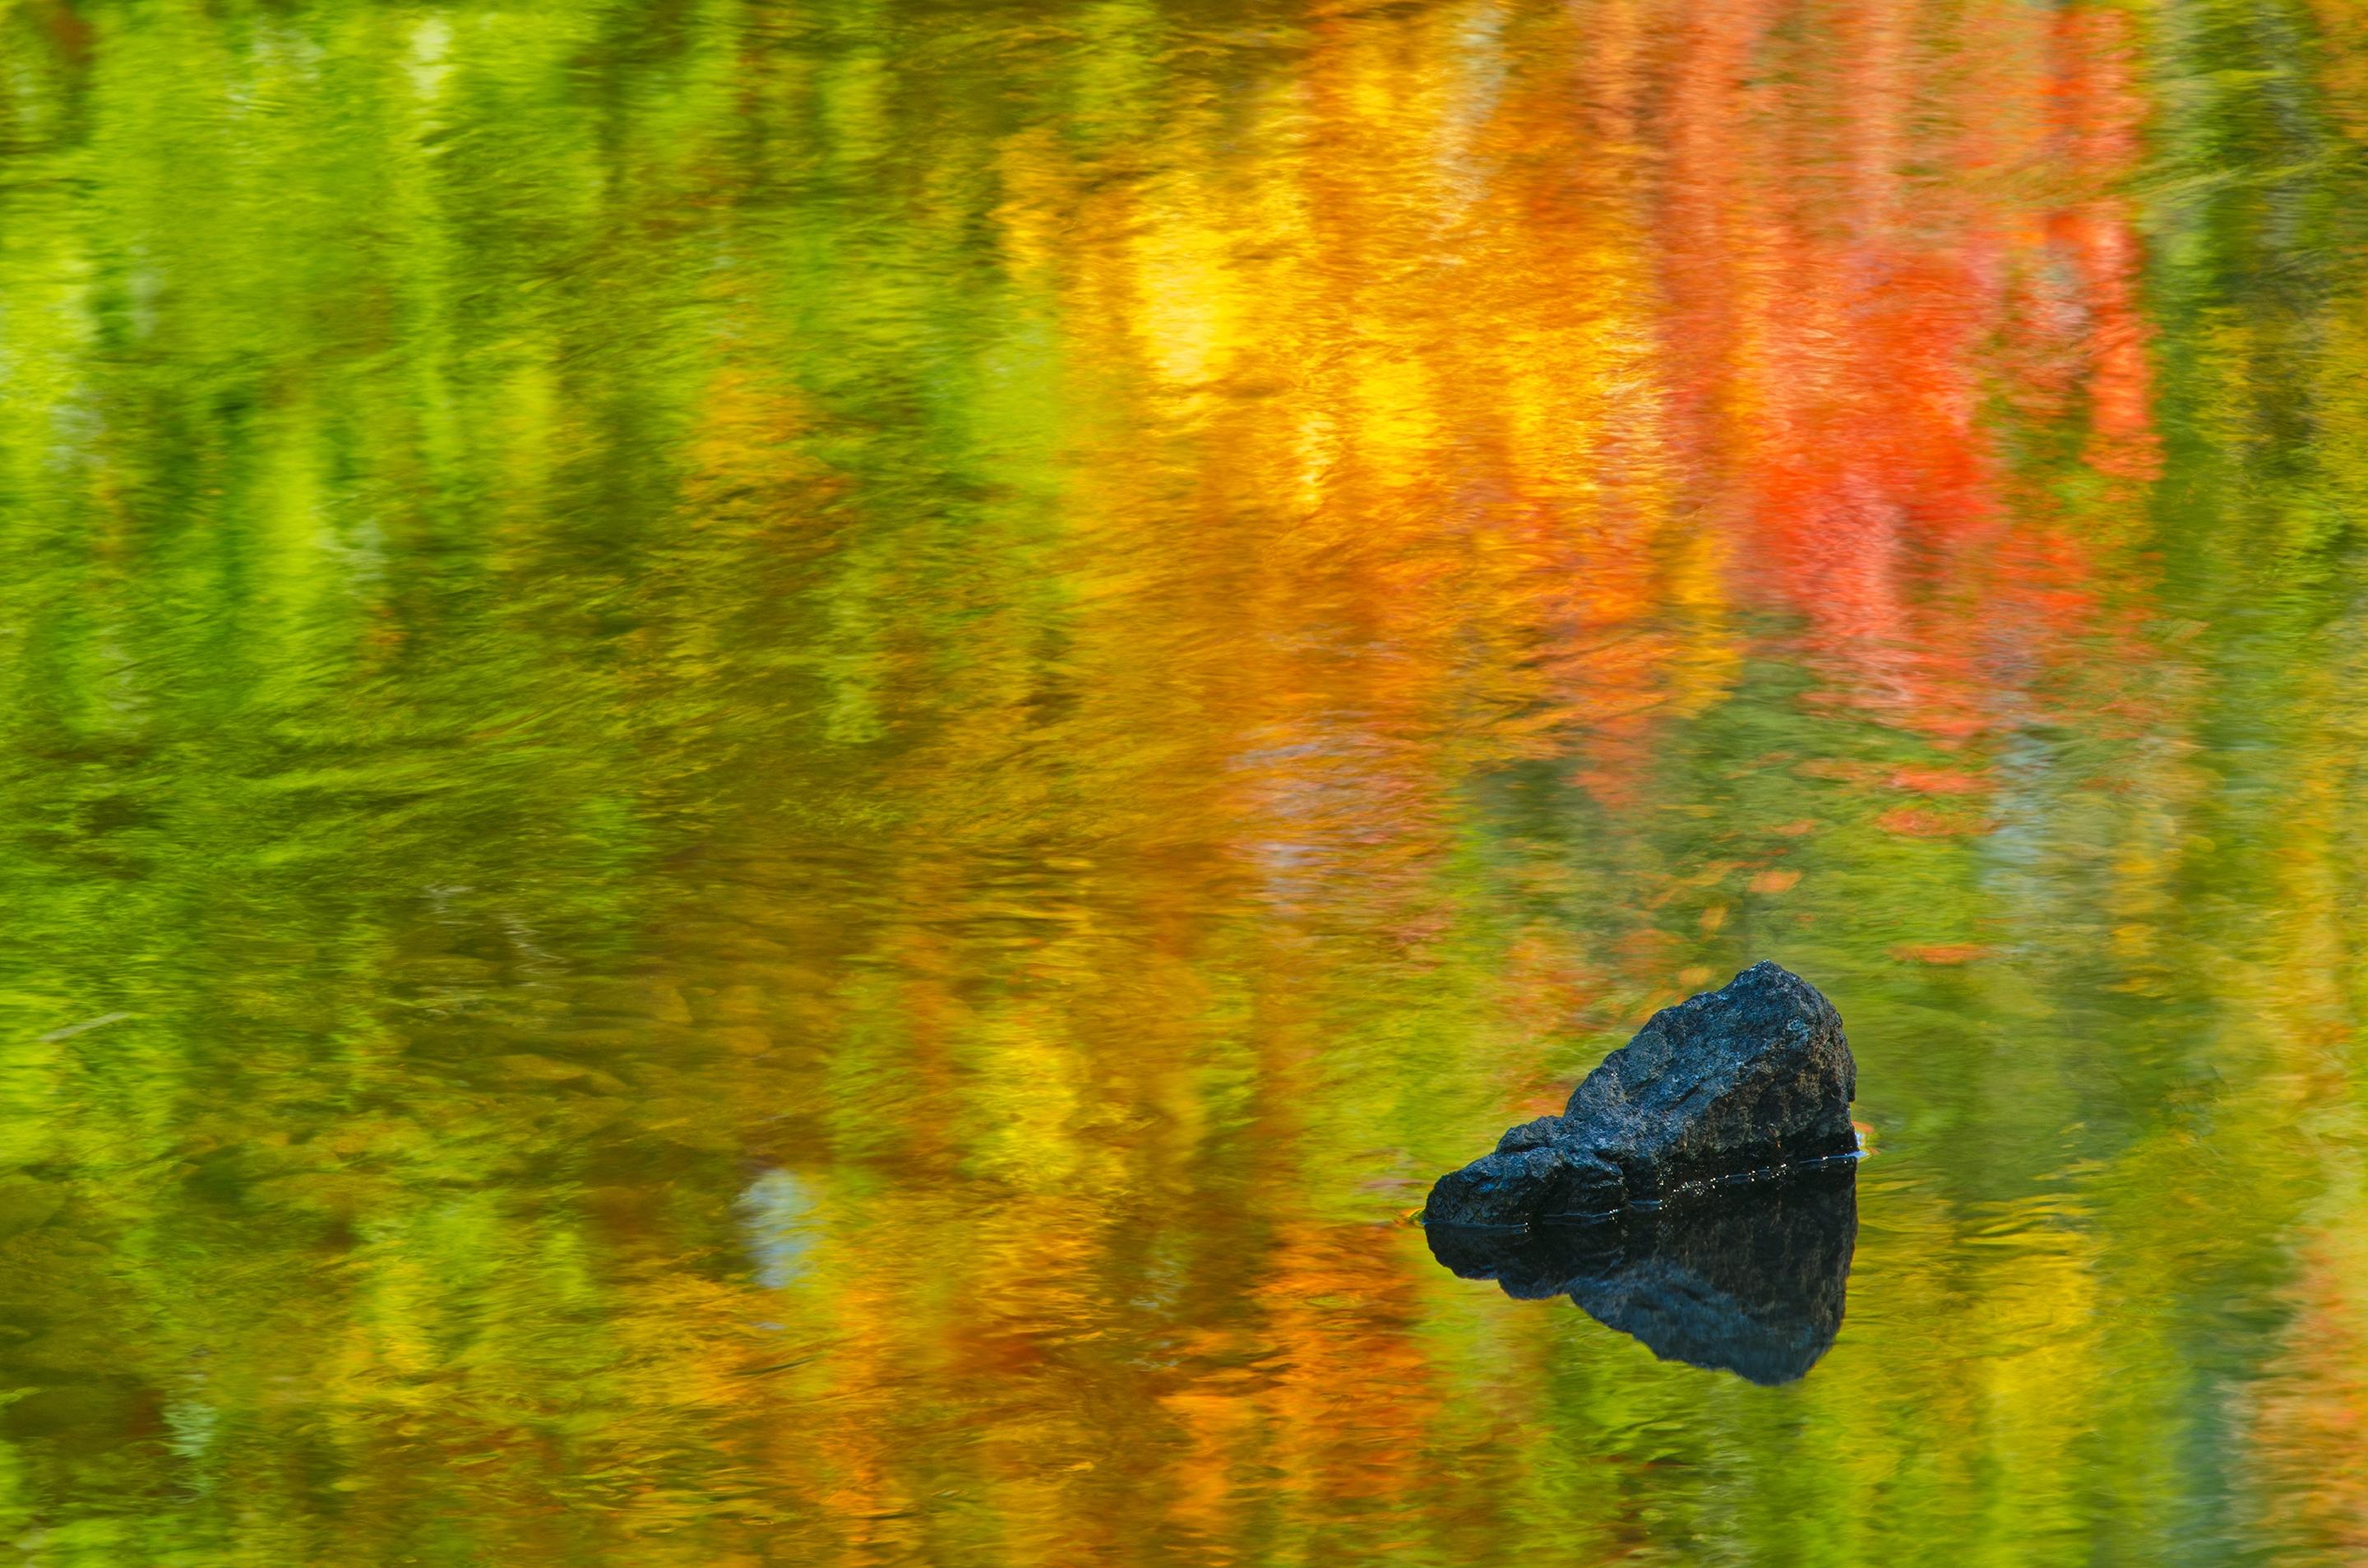 â€˜Rock in Creek' by Mike Grandmaison Sioux Narrows, Ontario. Canada  I like the simplicity of this scene â€“ just a rock surrounded by colorful water from the nearby autumn-colored foliage.  From my book â€˜Mike Grandmaisonâ€™s Ontarioâ€™ (2015). 